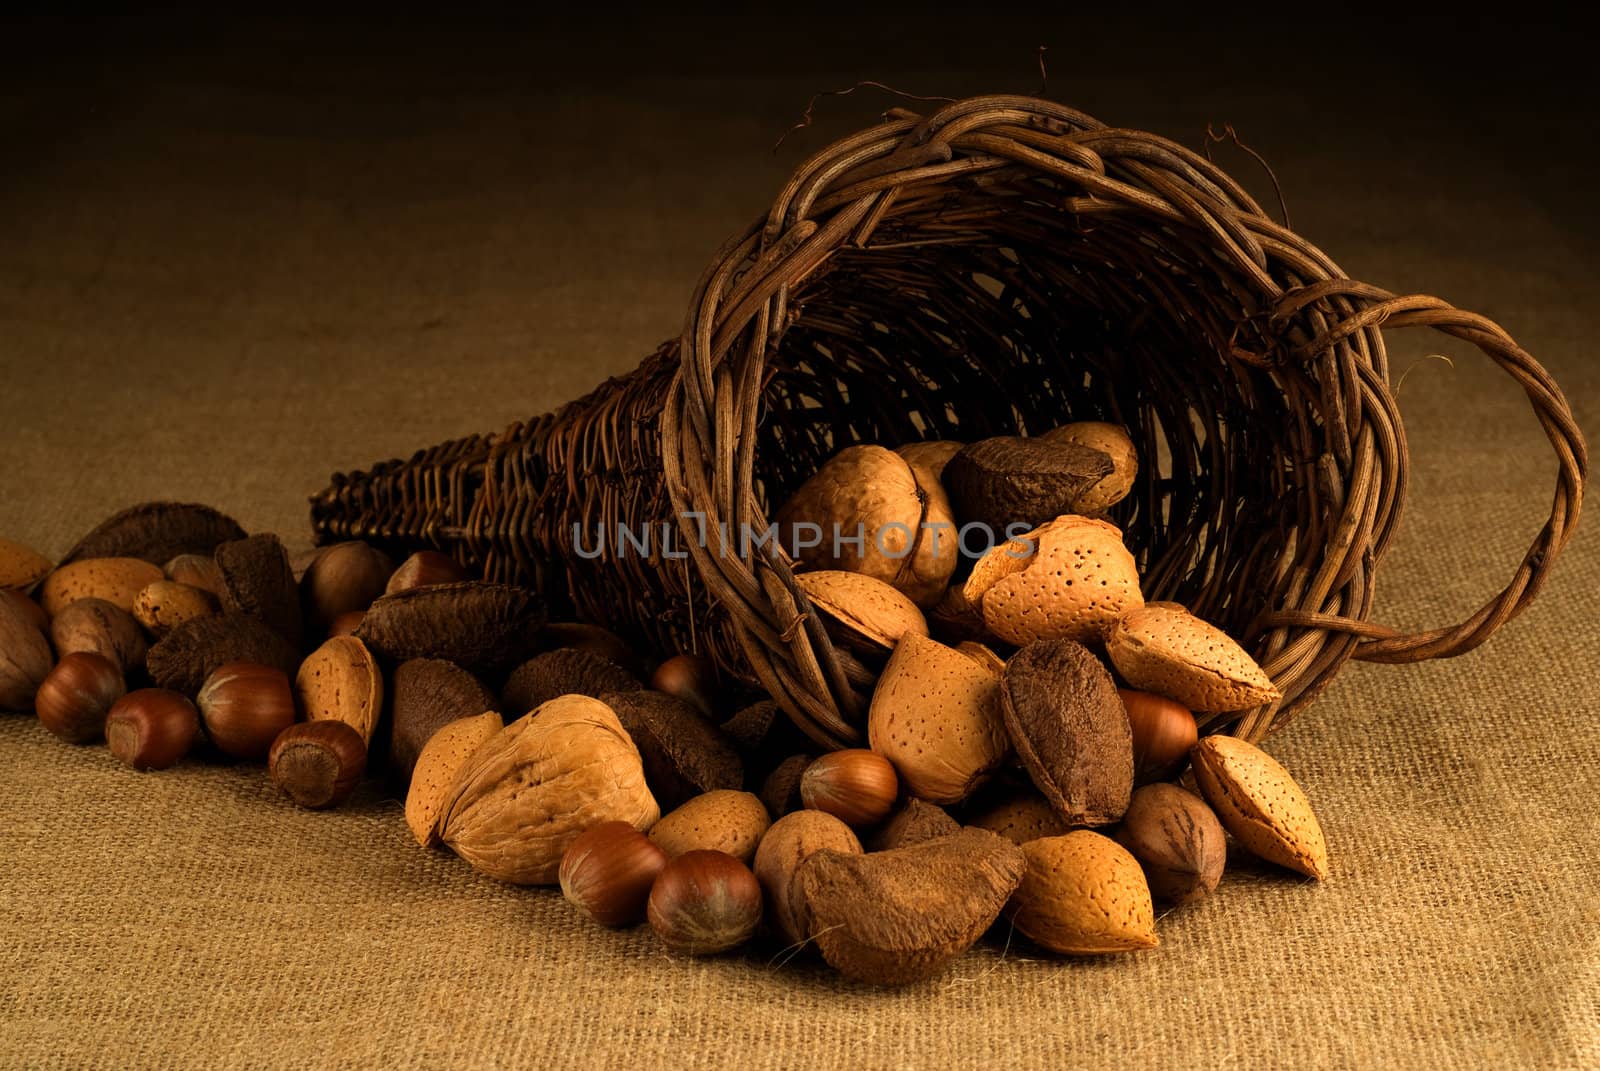 An assortment of nuts overflowing a basket on hesian background